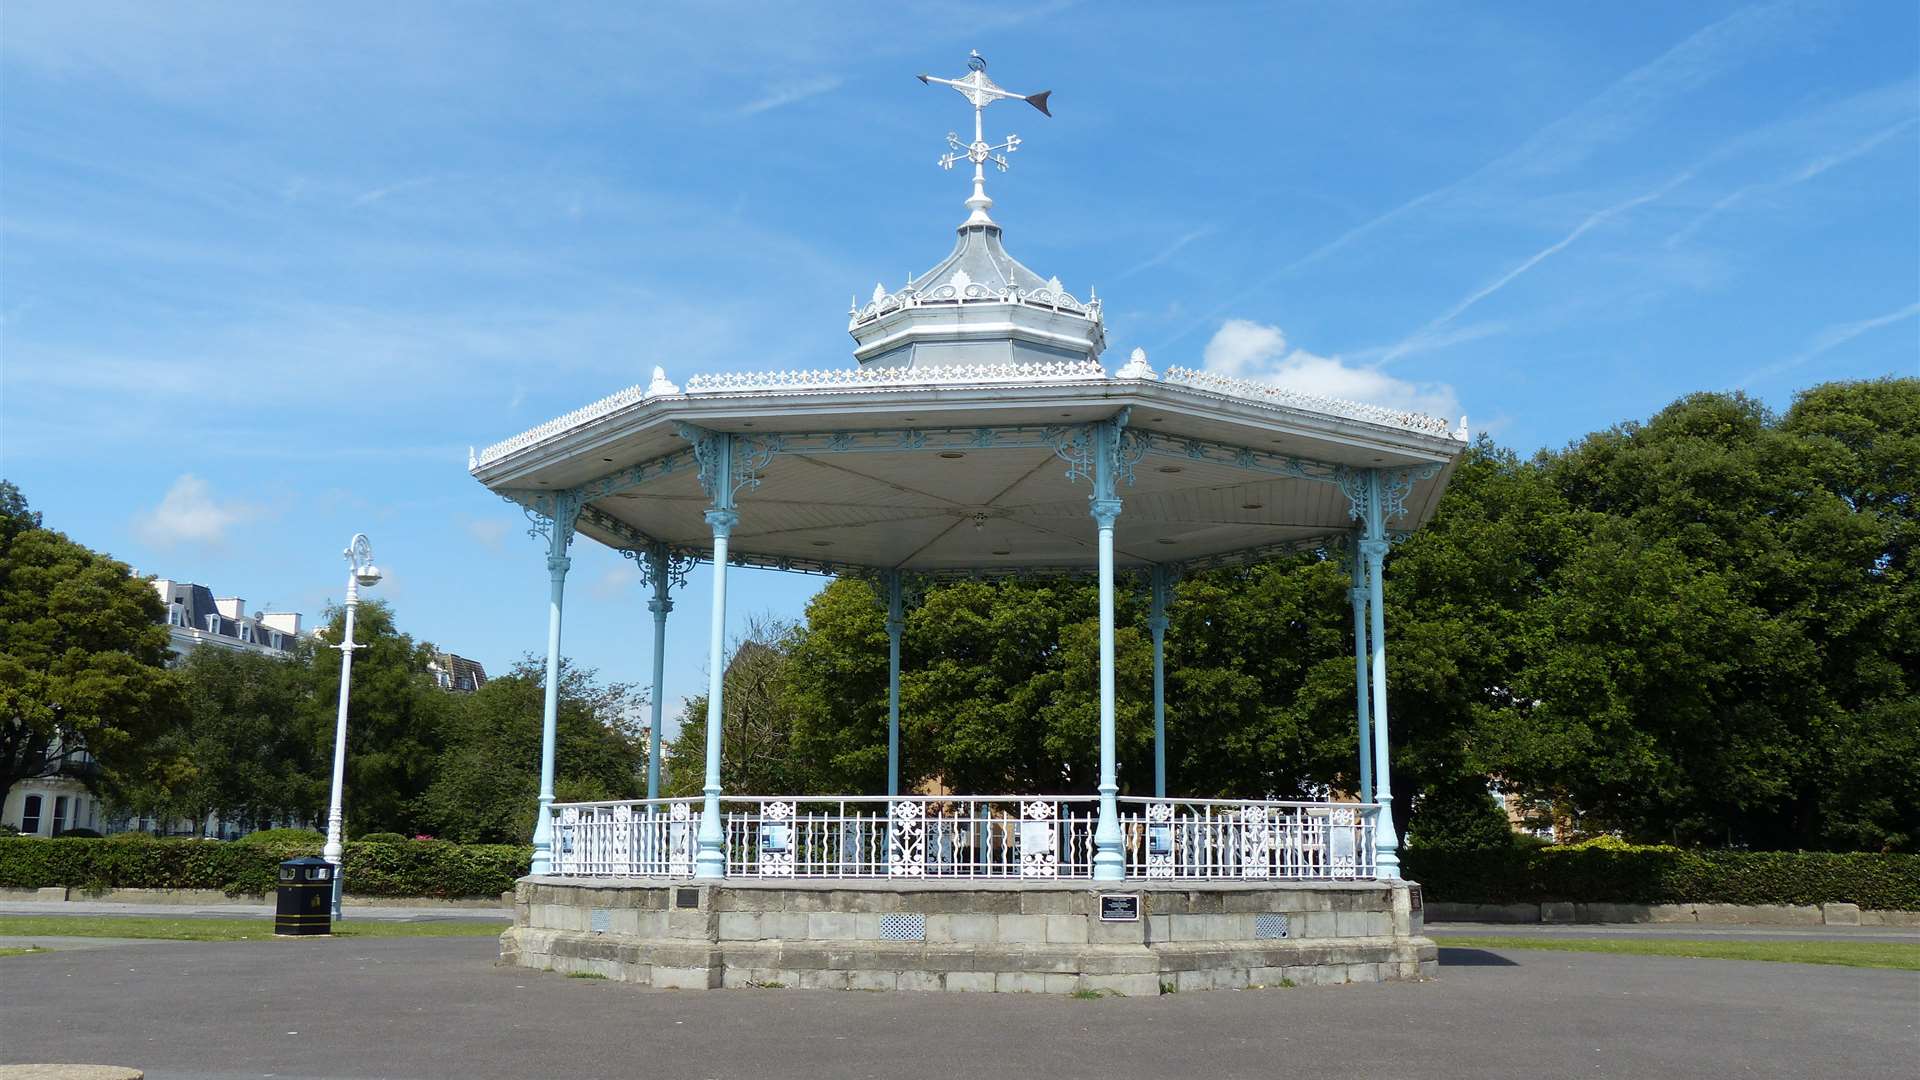 The Bandstand at the Leas